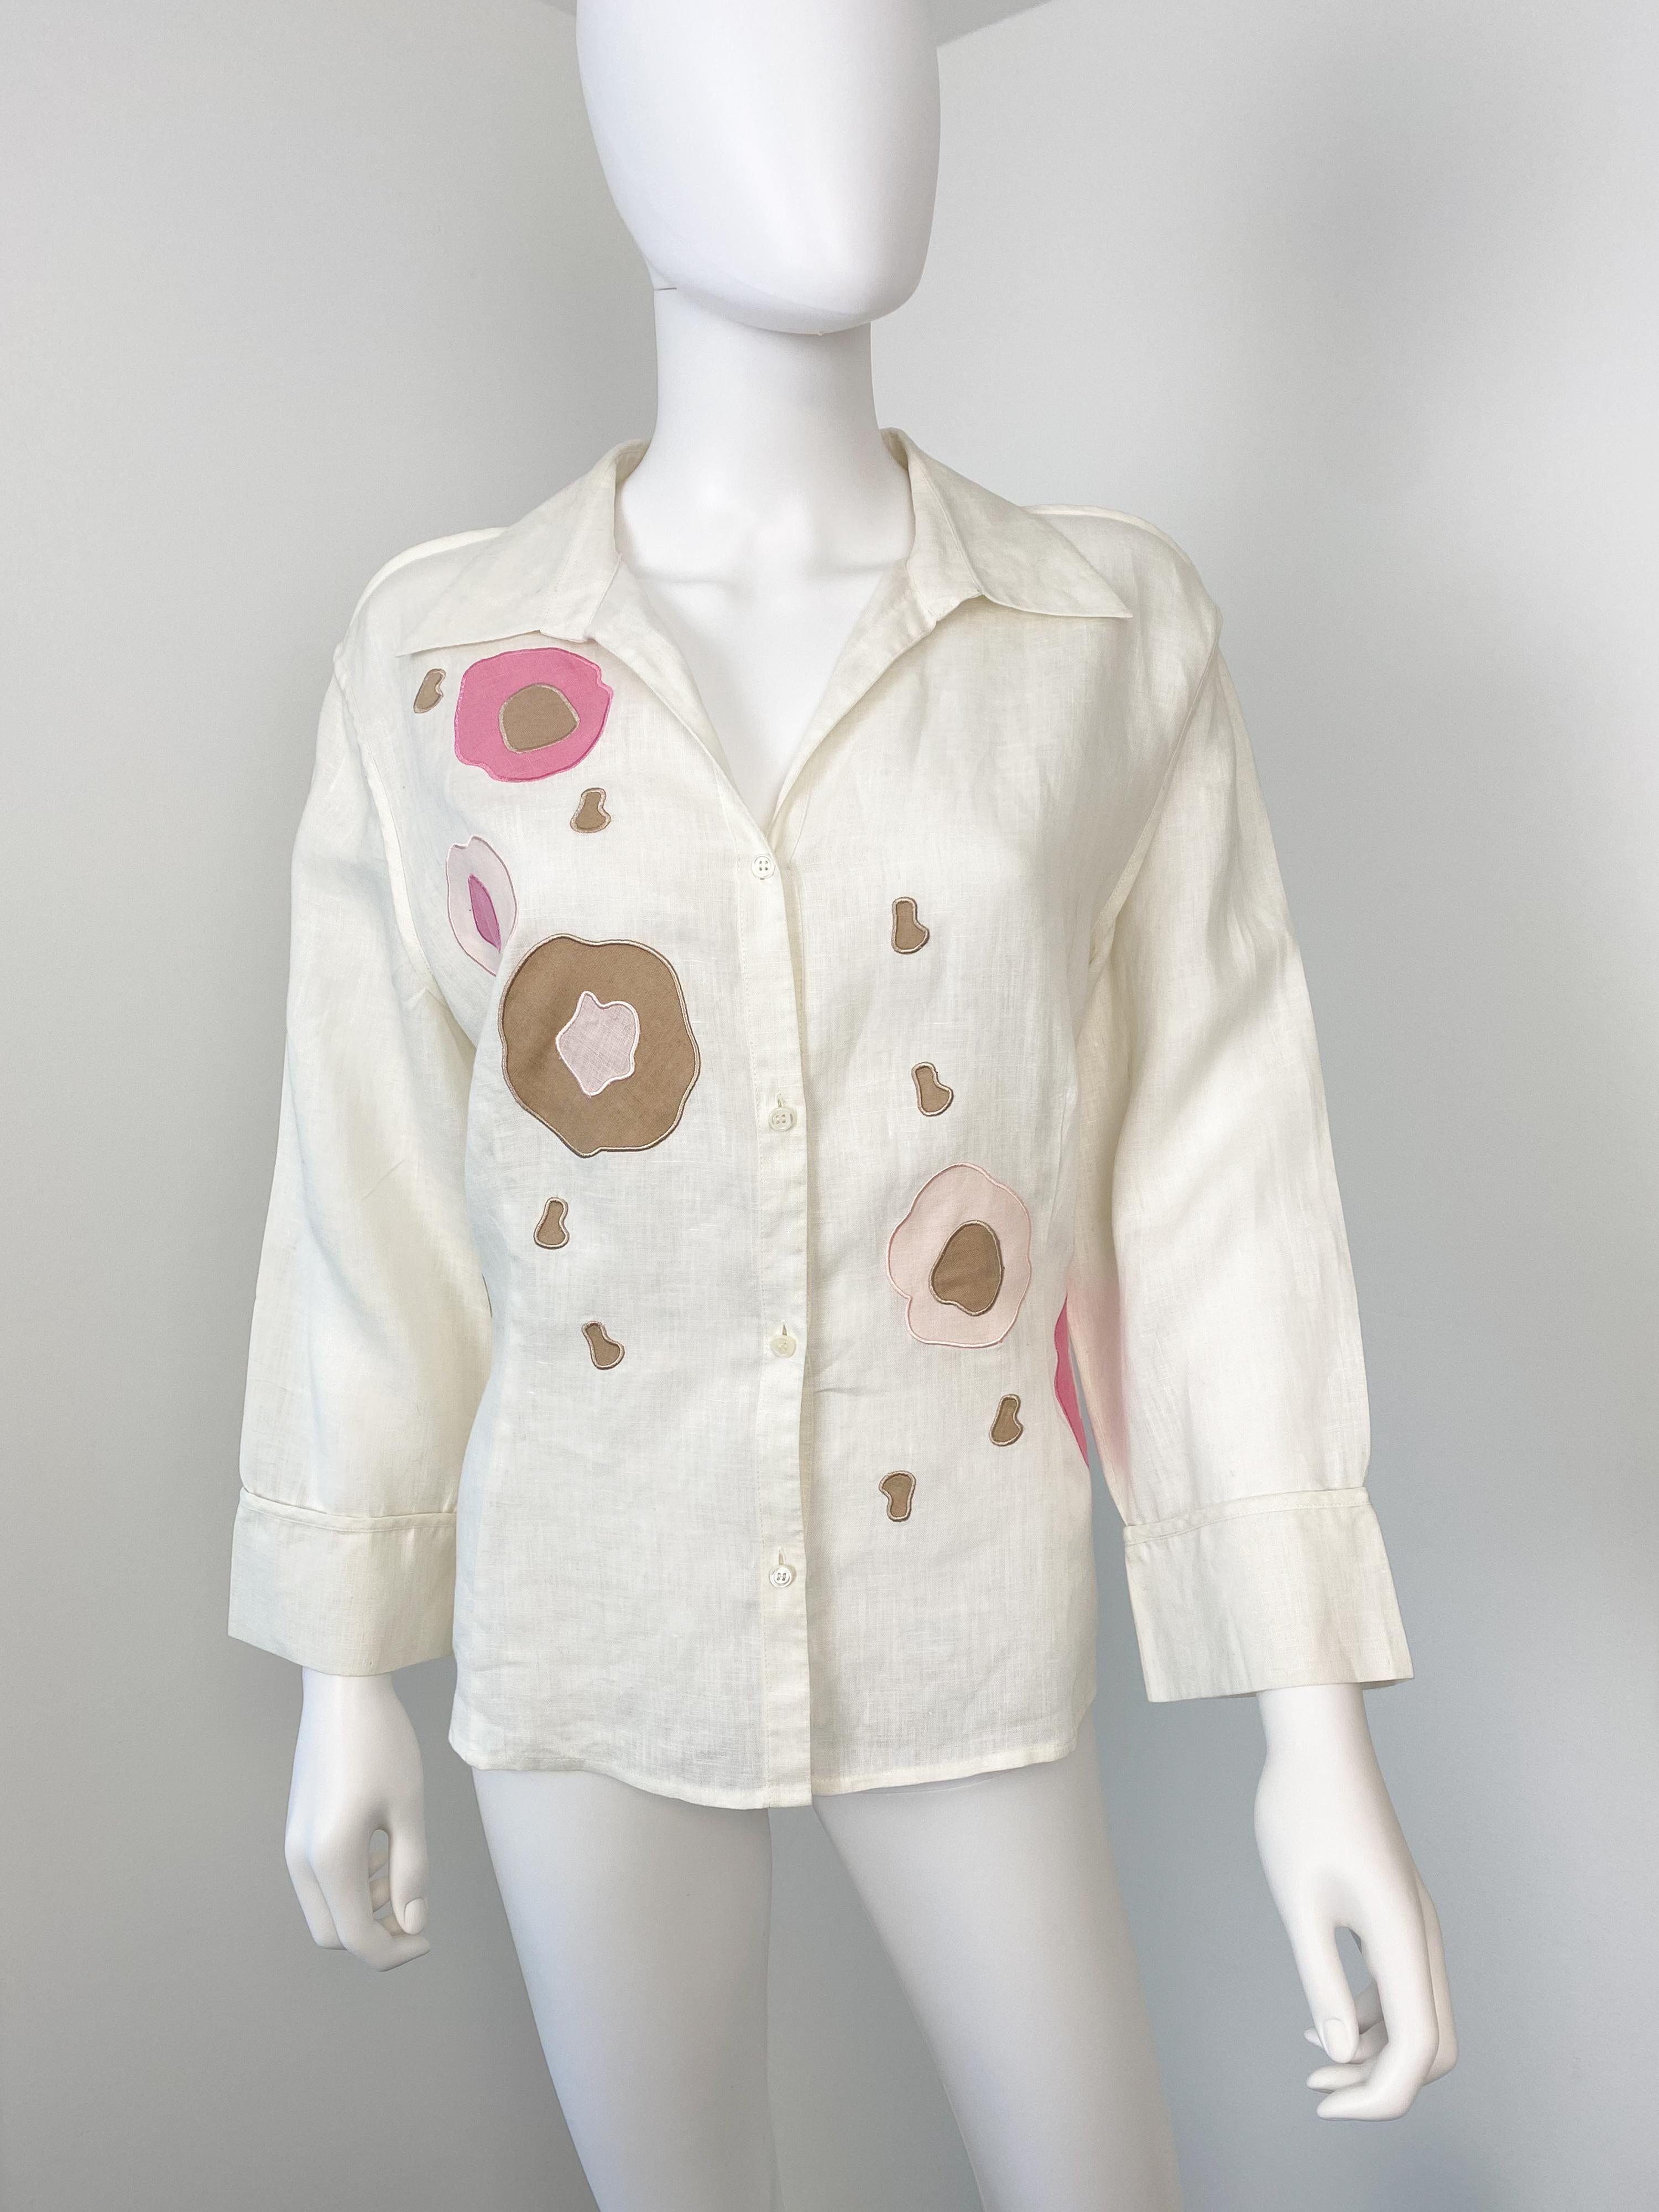 Wonderful vintage Louis Feraud 1990s linen and cotton blouse. Ivory color fabric with powder pink, taupe, and fuchsia pink floral embroidery. 
3/4 sleeves with large open cuff. Slightly fitted cut.

Brand: Louis Feraud
Model: Linen shirt
Material: